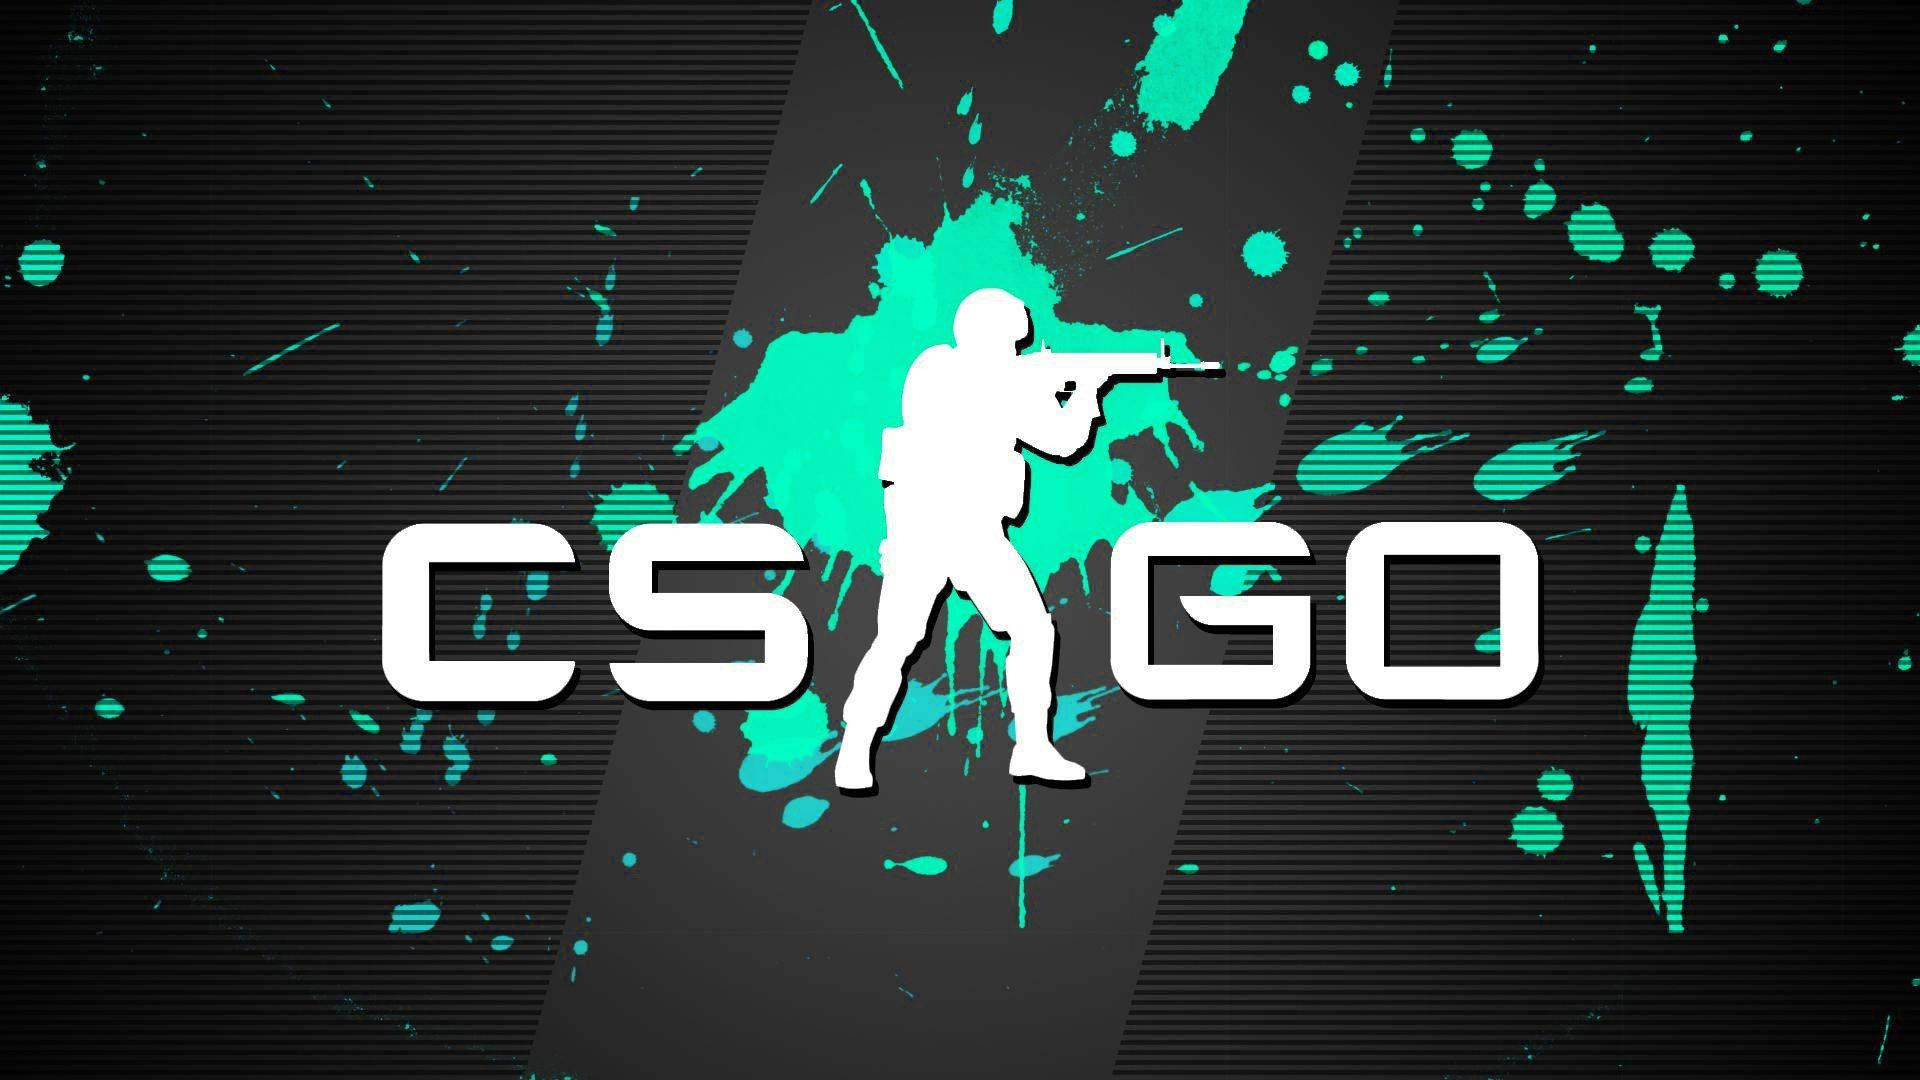 Free Csgo Wallpaper Downloads, [100+] Csgo Wallpapers for FREE | Wallpapers .com